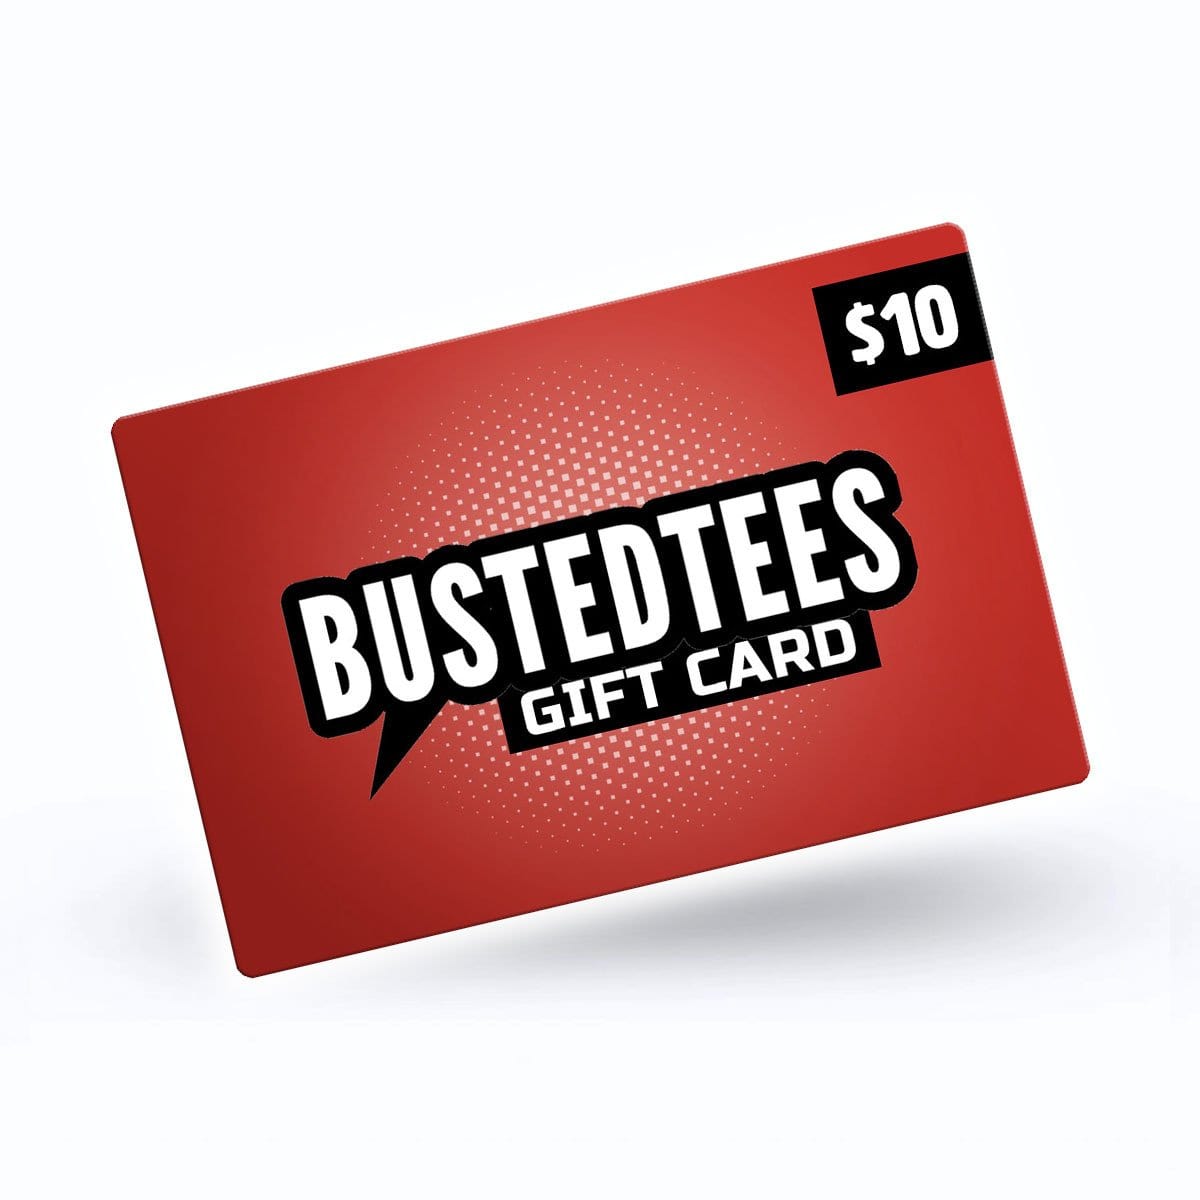 Gift Card - BustedTees.com